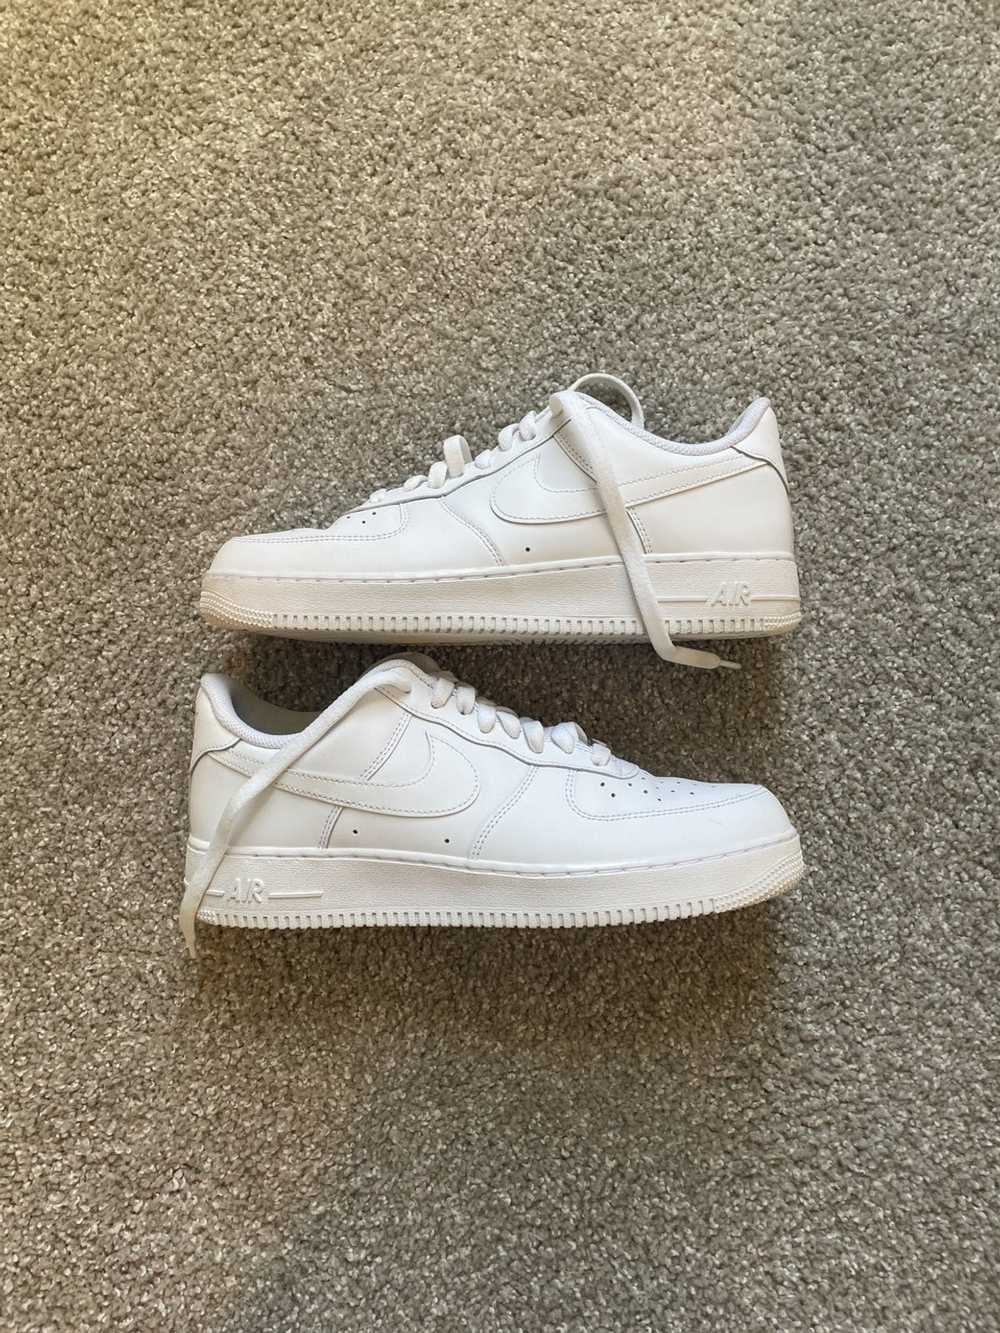 Nike Air Force 1 low white - image 2